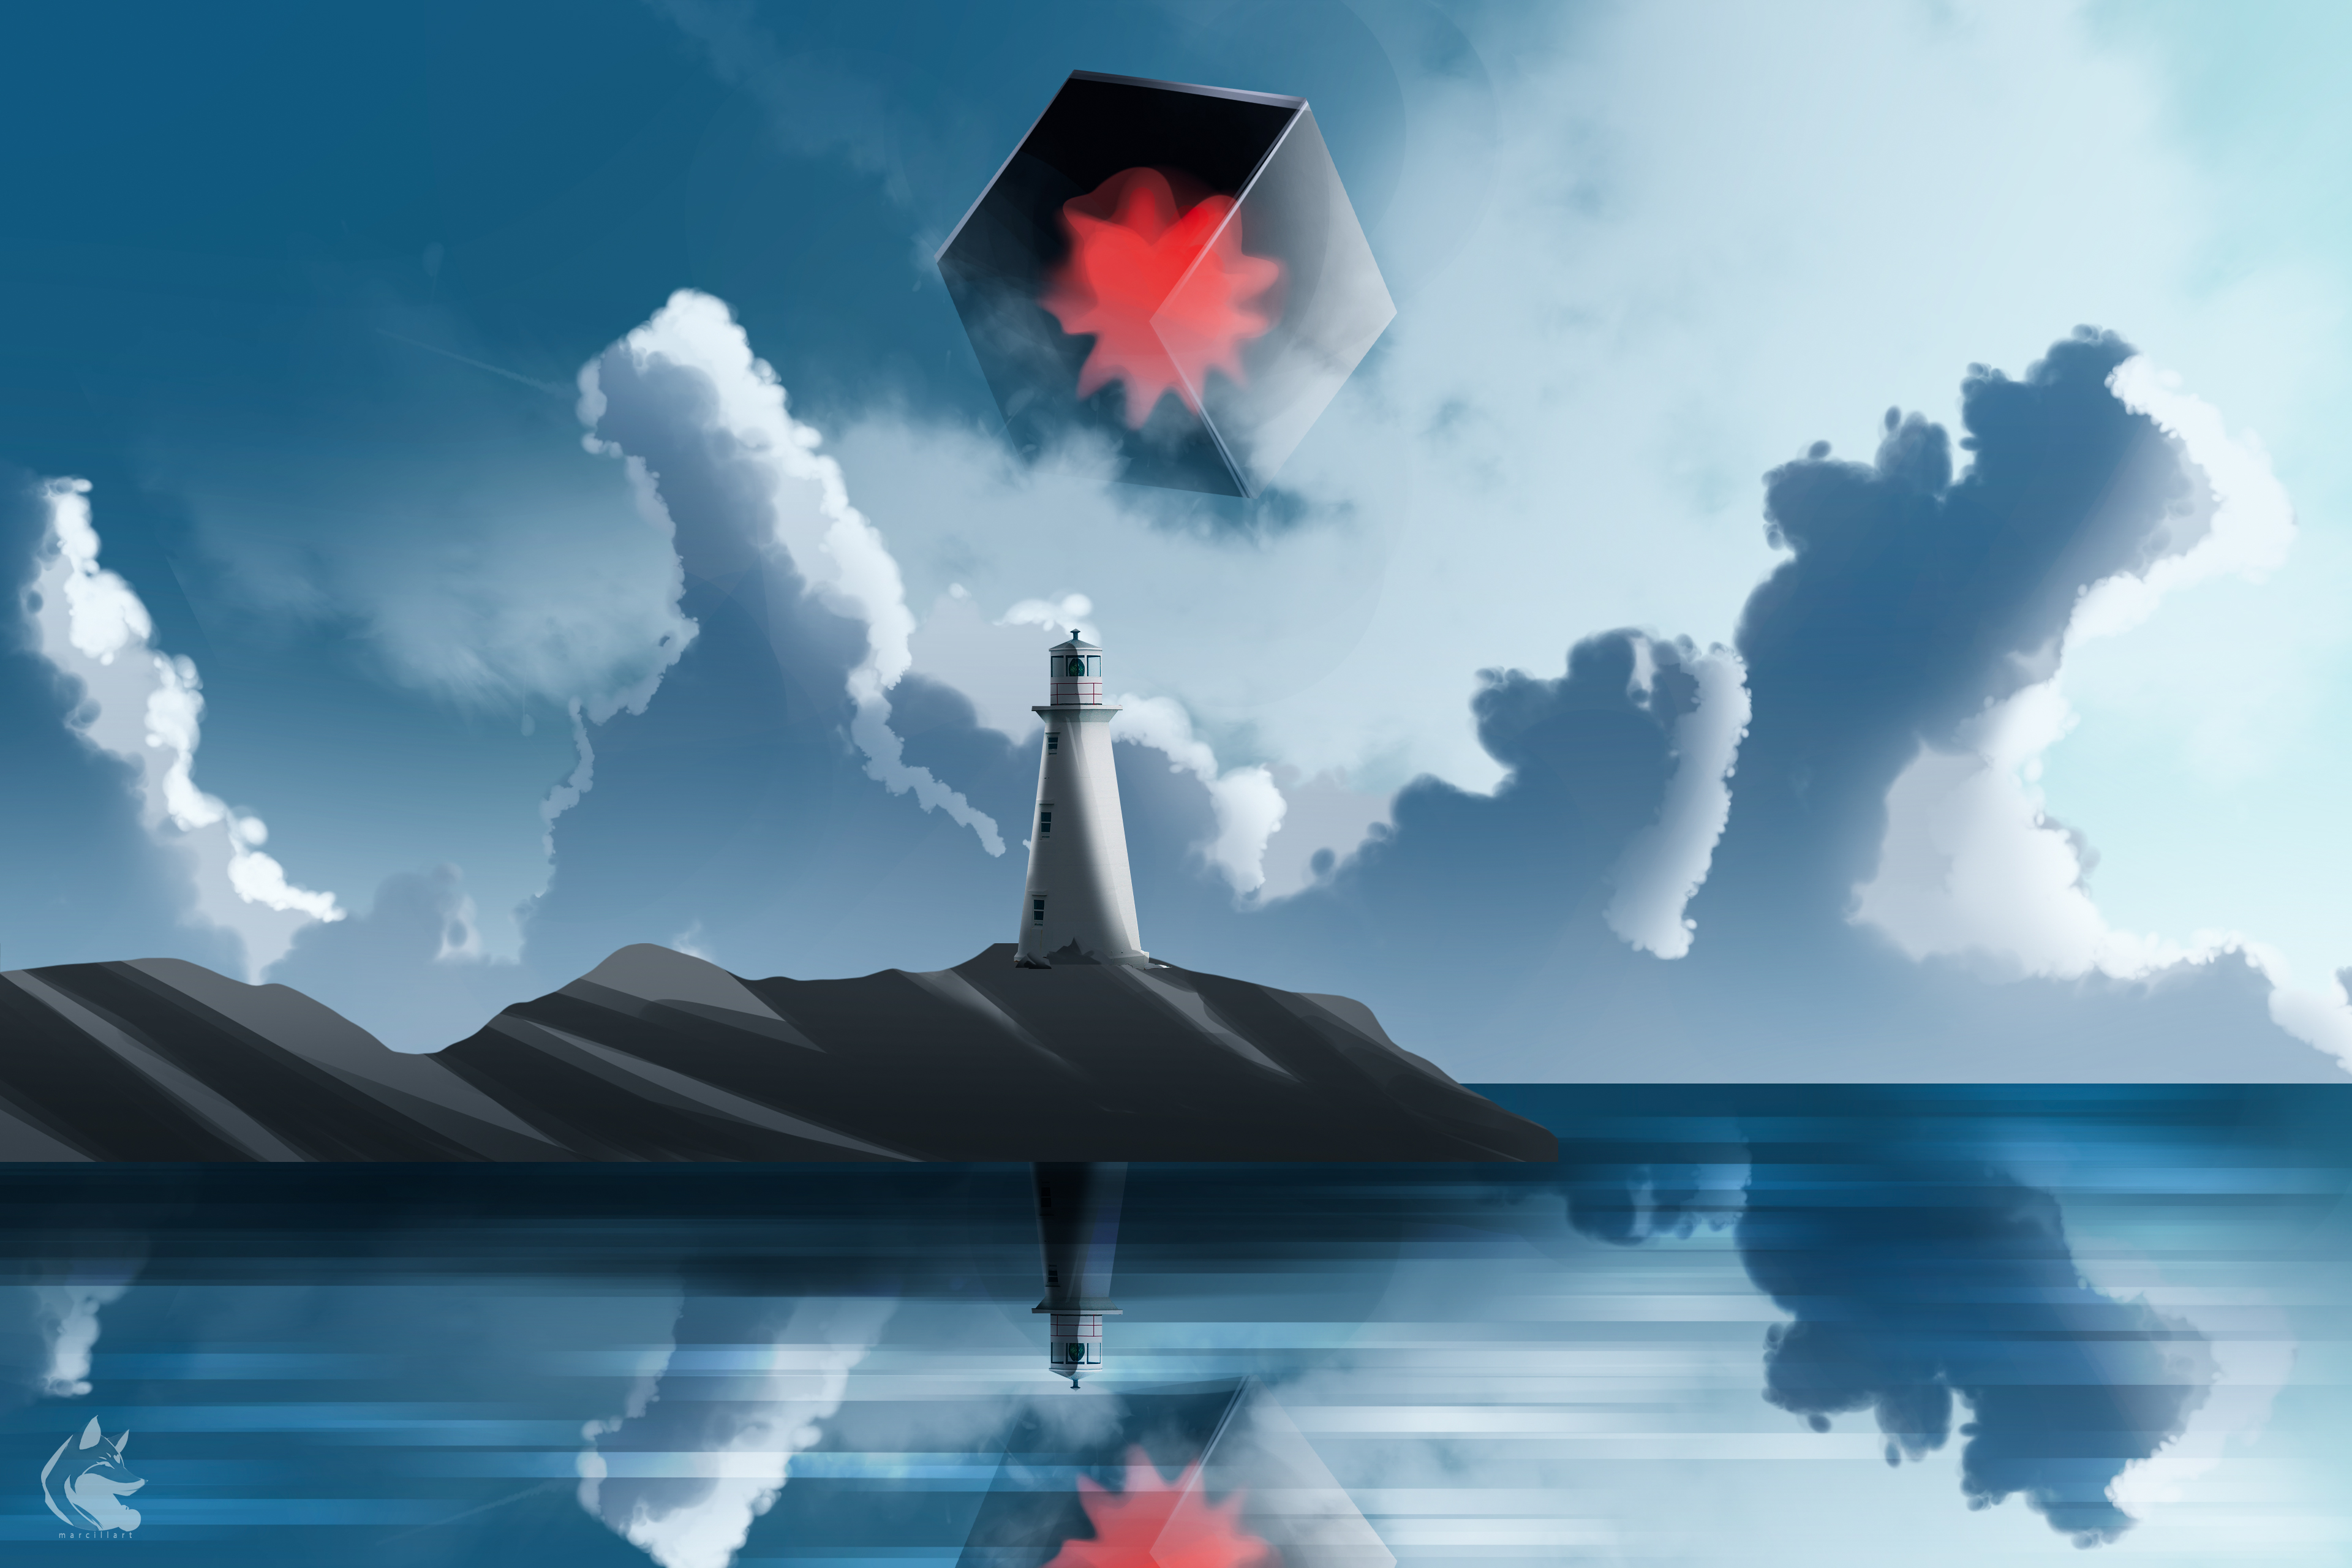 Cube No Mans Sky Surreal Light House Sea Clouds Video Games Reflection 3840x2560